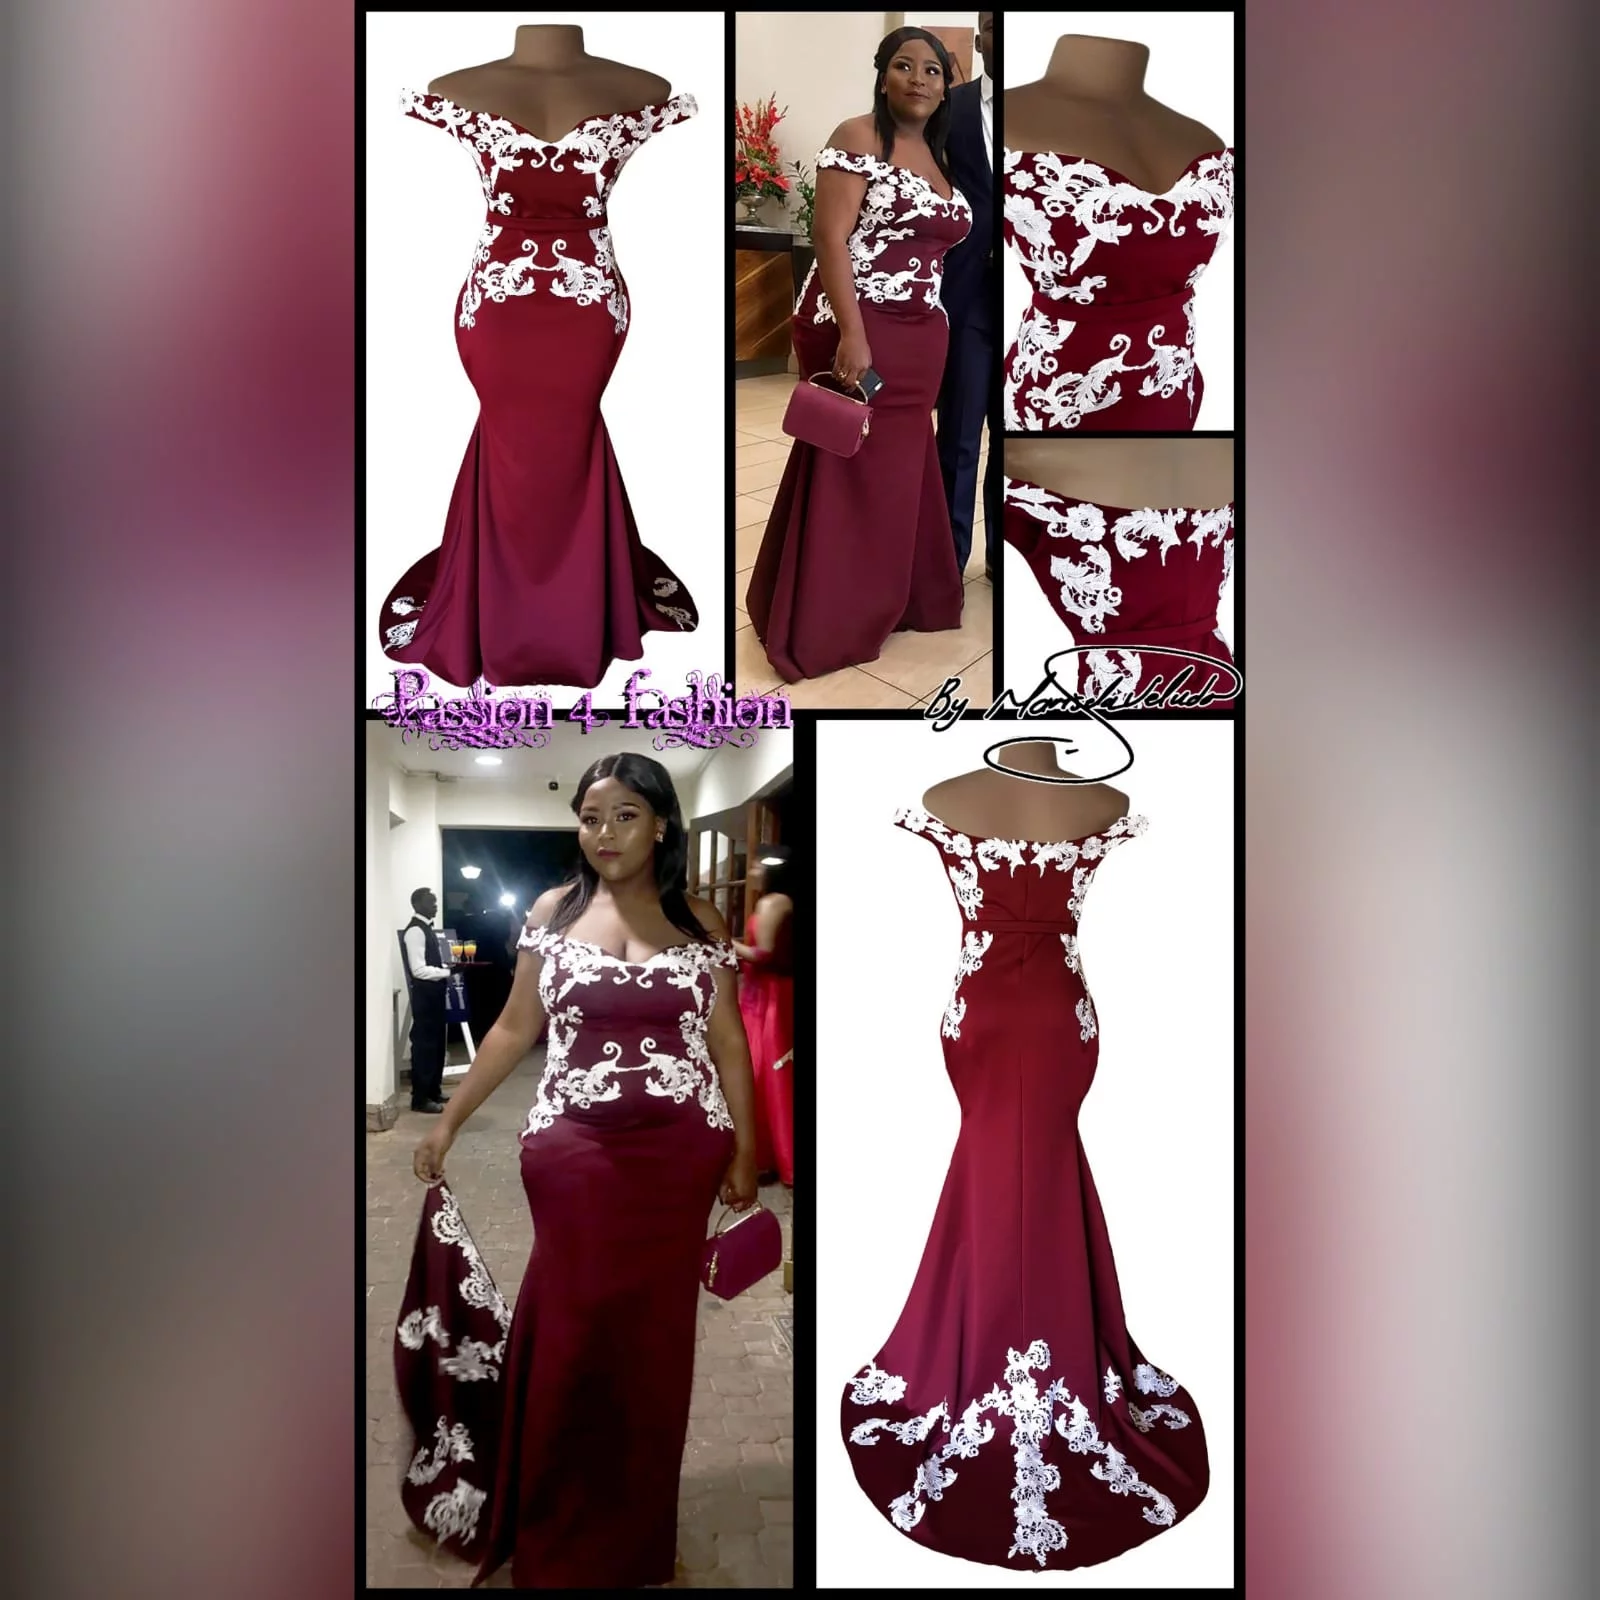 Maroon and white off shoulder soft mermaid matric dress 3 maroon and white off shoulder soft mermaid matric dress. With bodice, hips and train detailed with white lace.